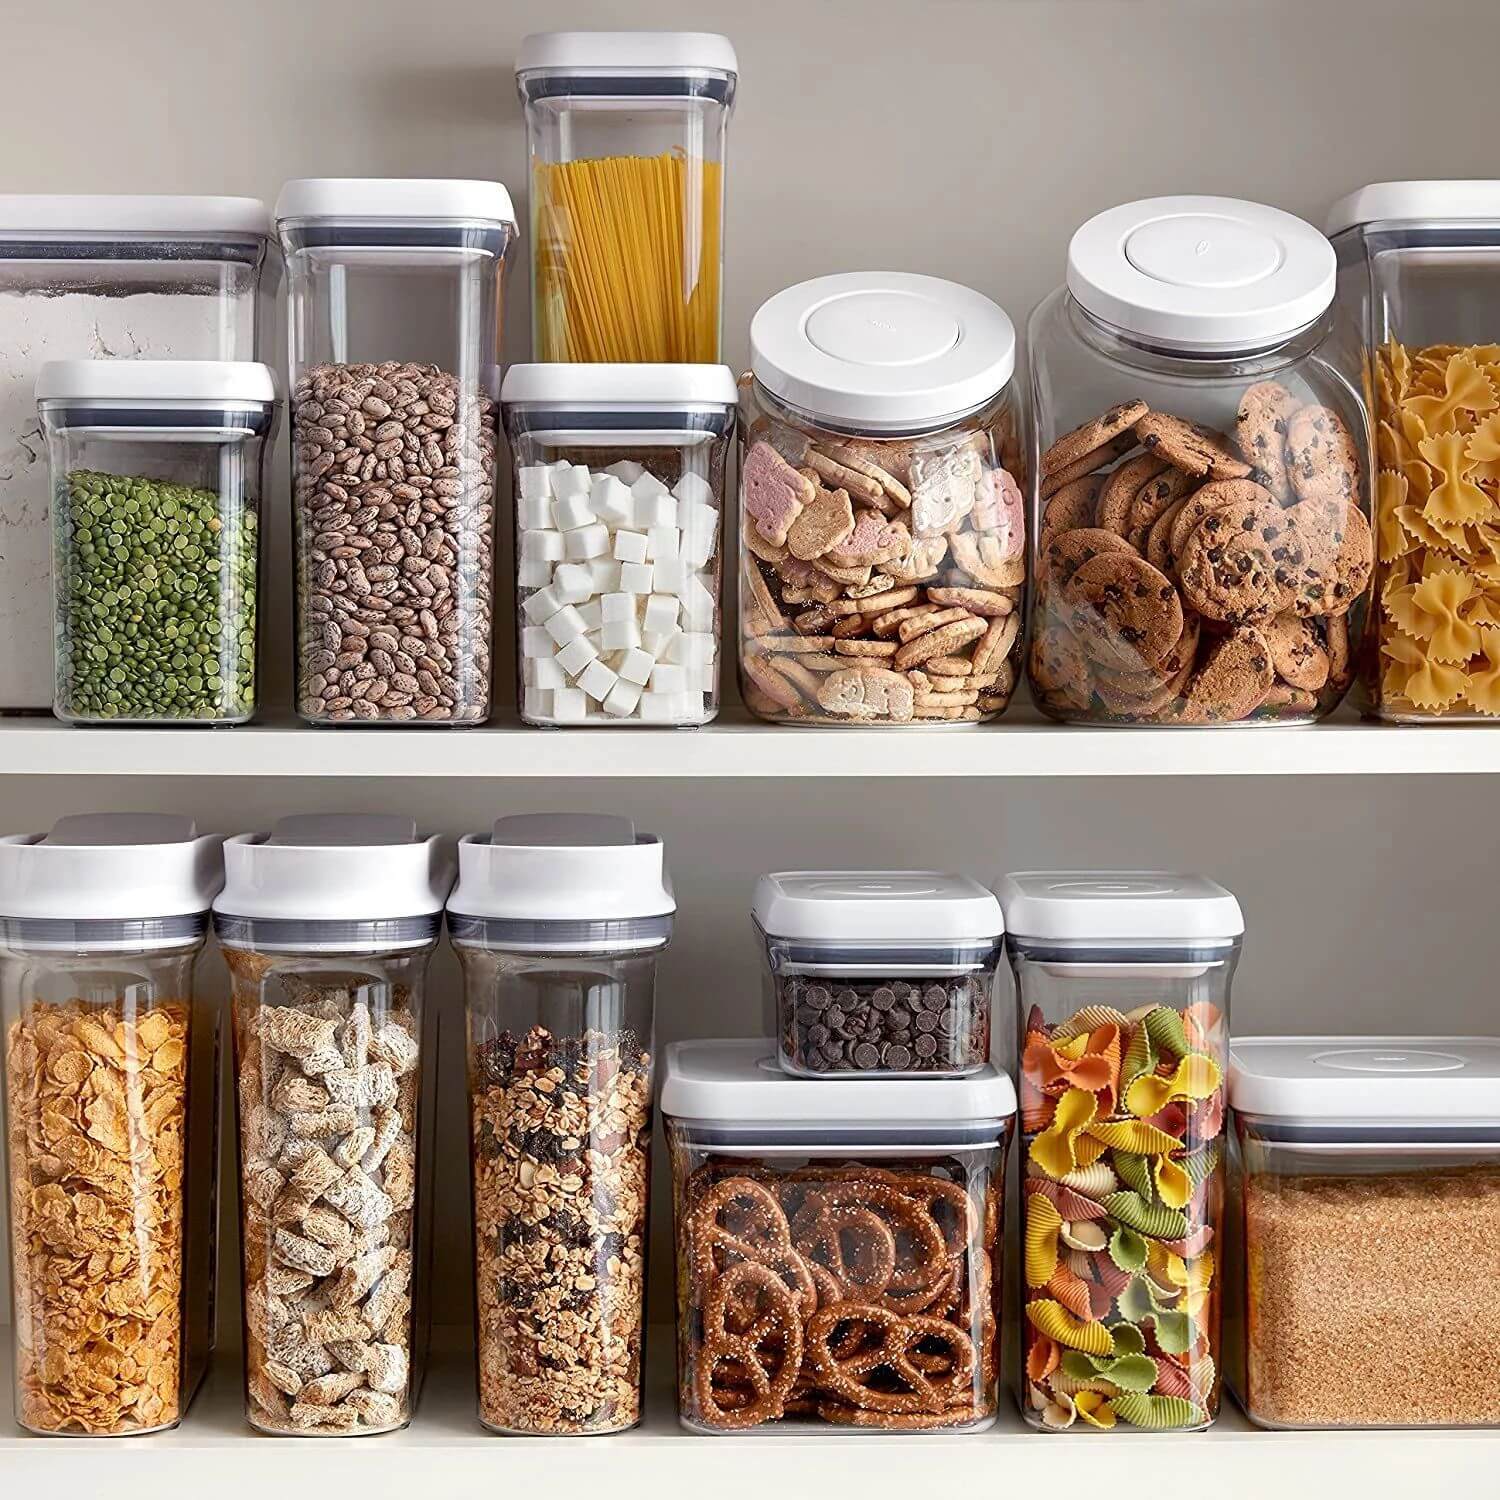 OXO kitchen containers on a pantry shelf with pasta, cookies and other pantry items stored inside